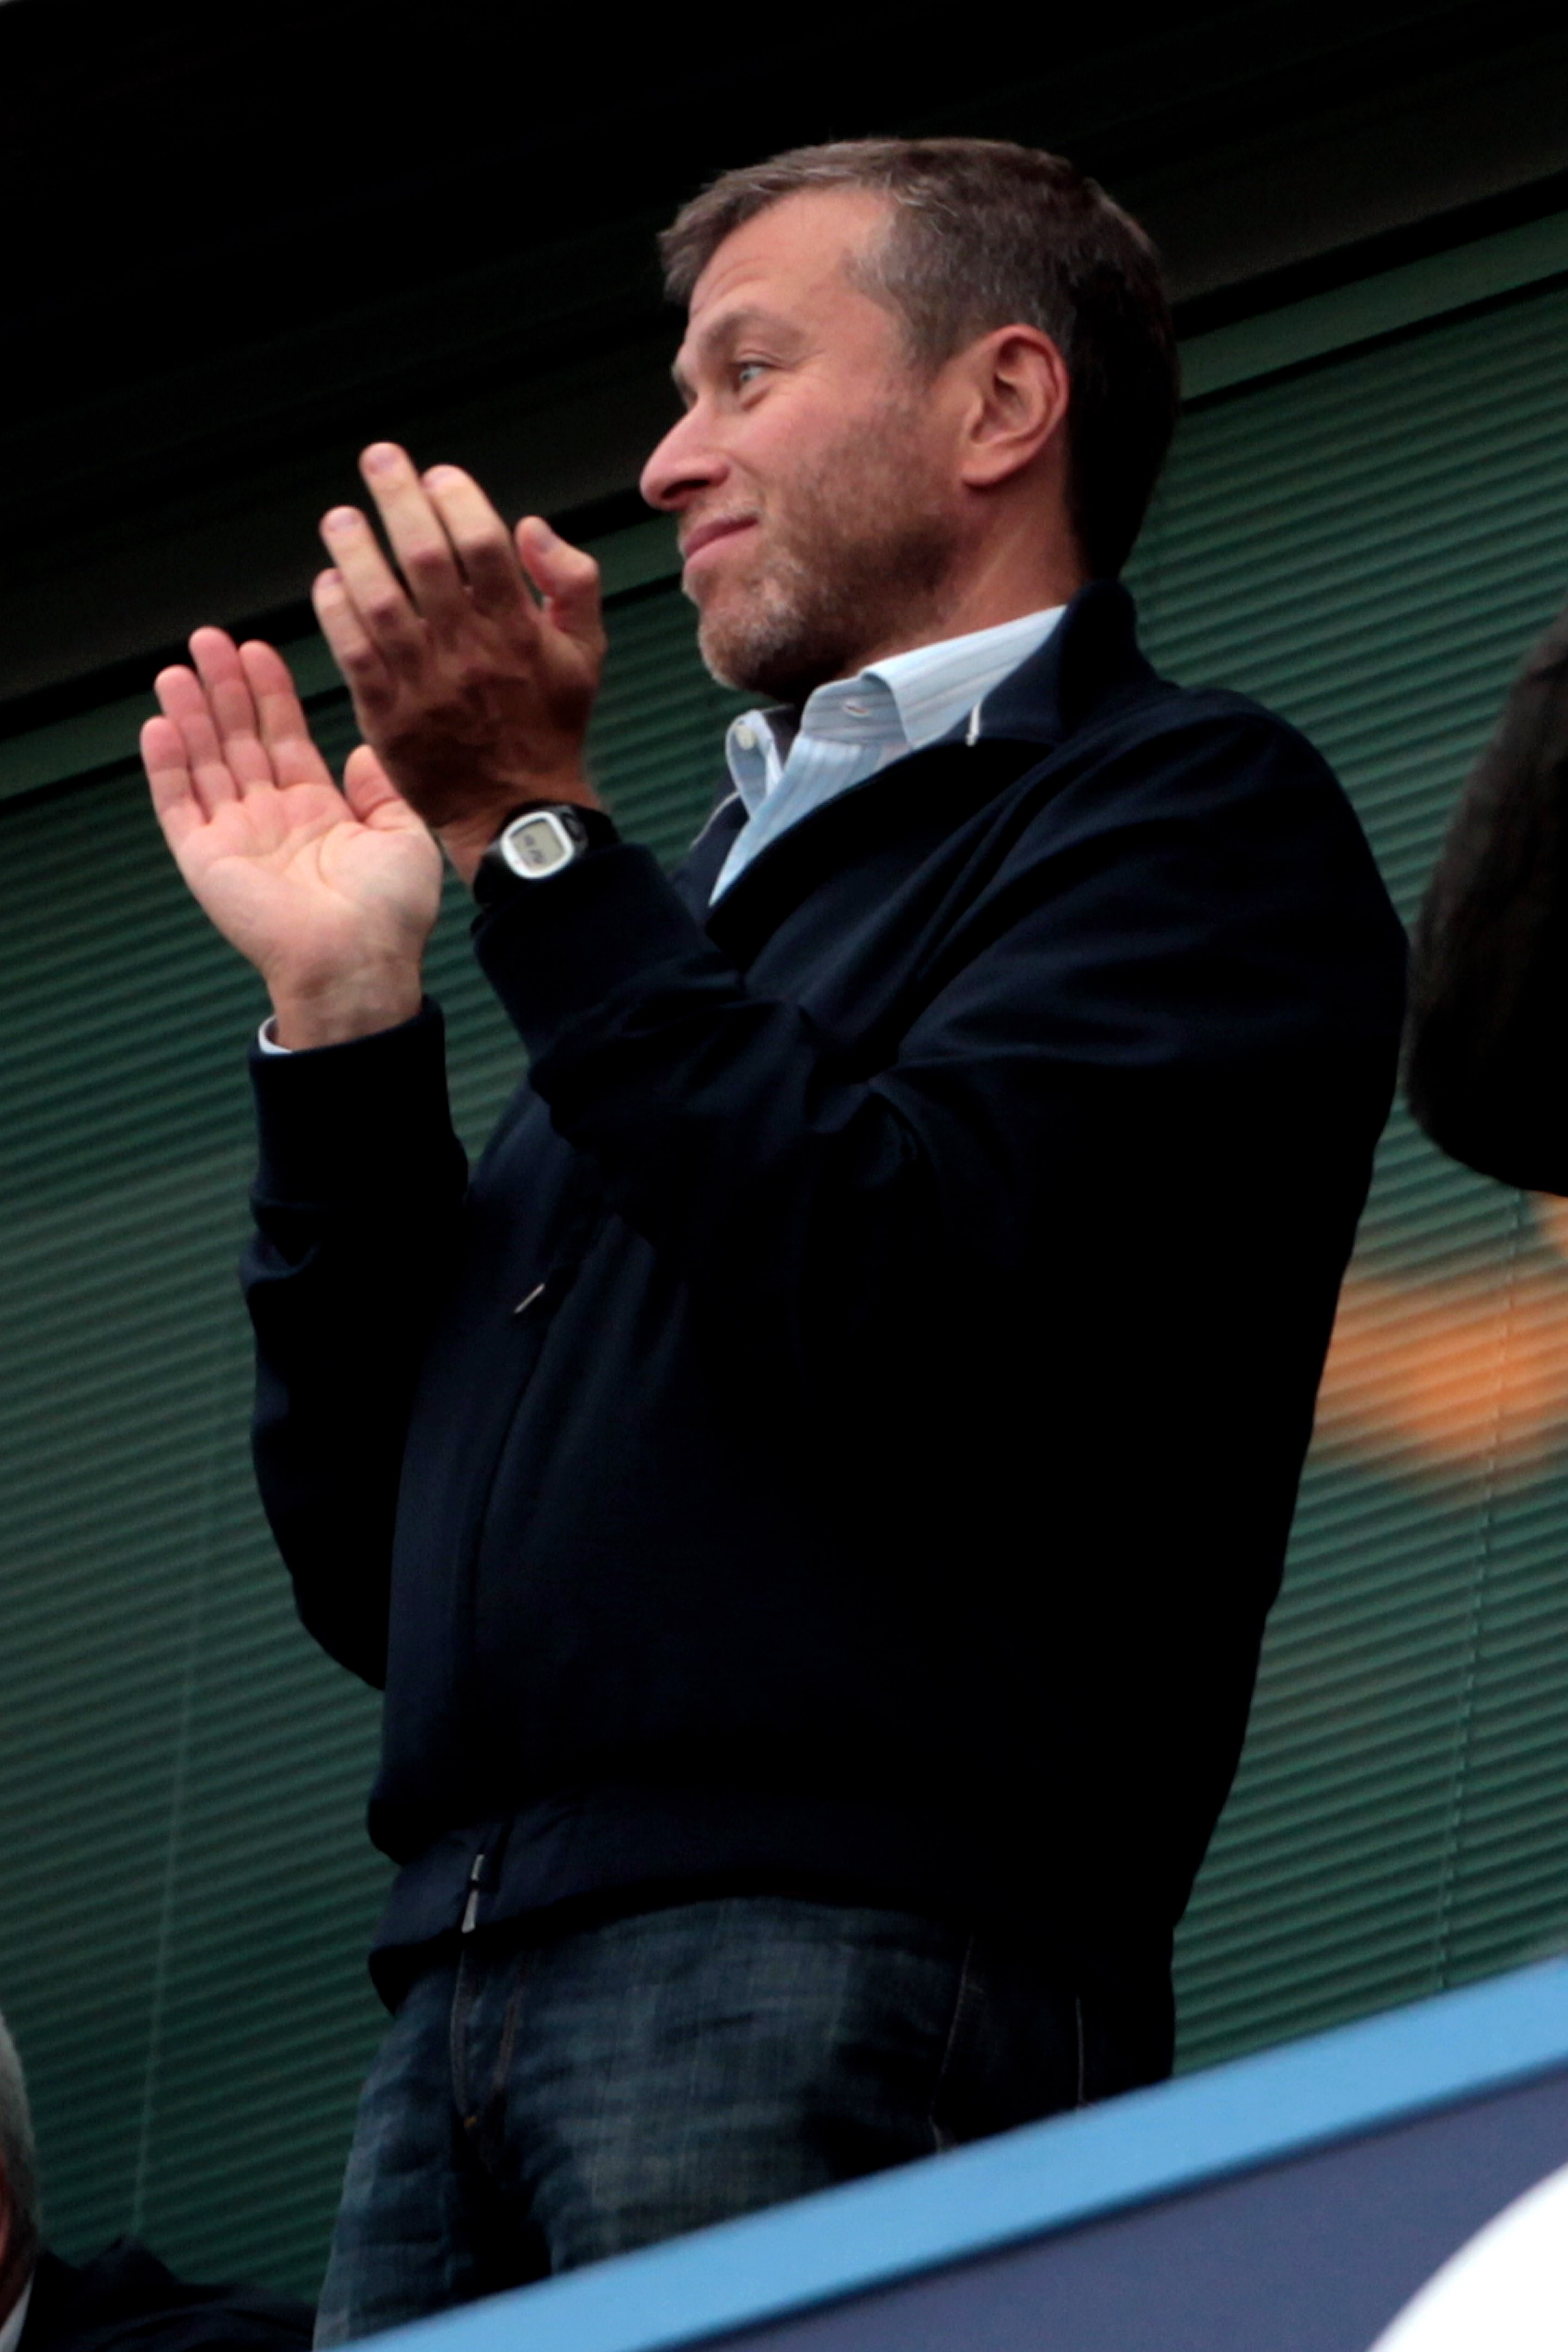 LONDON, ENGLAND - AUGUST 14:  Chelsea owner Roman Abramovich applauds his team on the final whistle following their 6-0 victory during the Barclays Premier League match between Chelsea and West Bromwich Albion at Stamford Bridge on August 14, 2010 in Lond